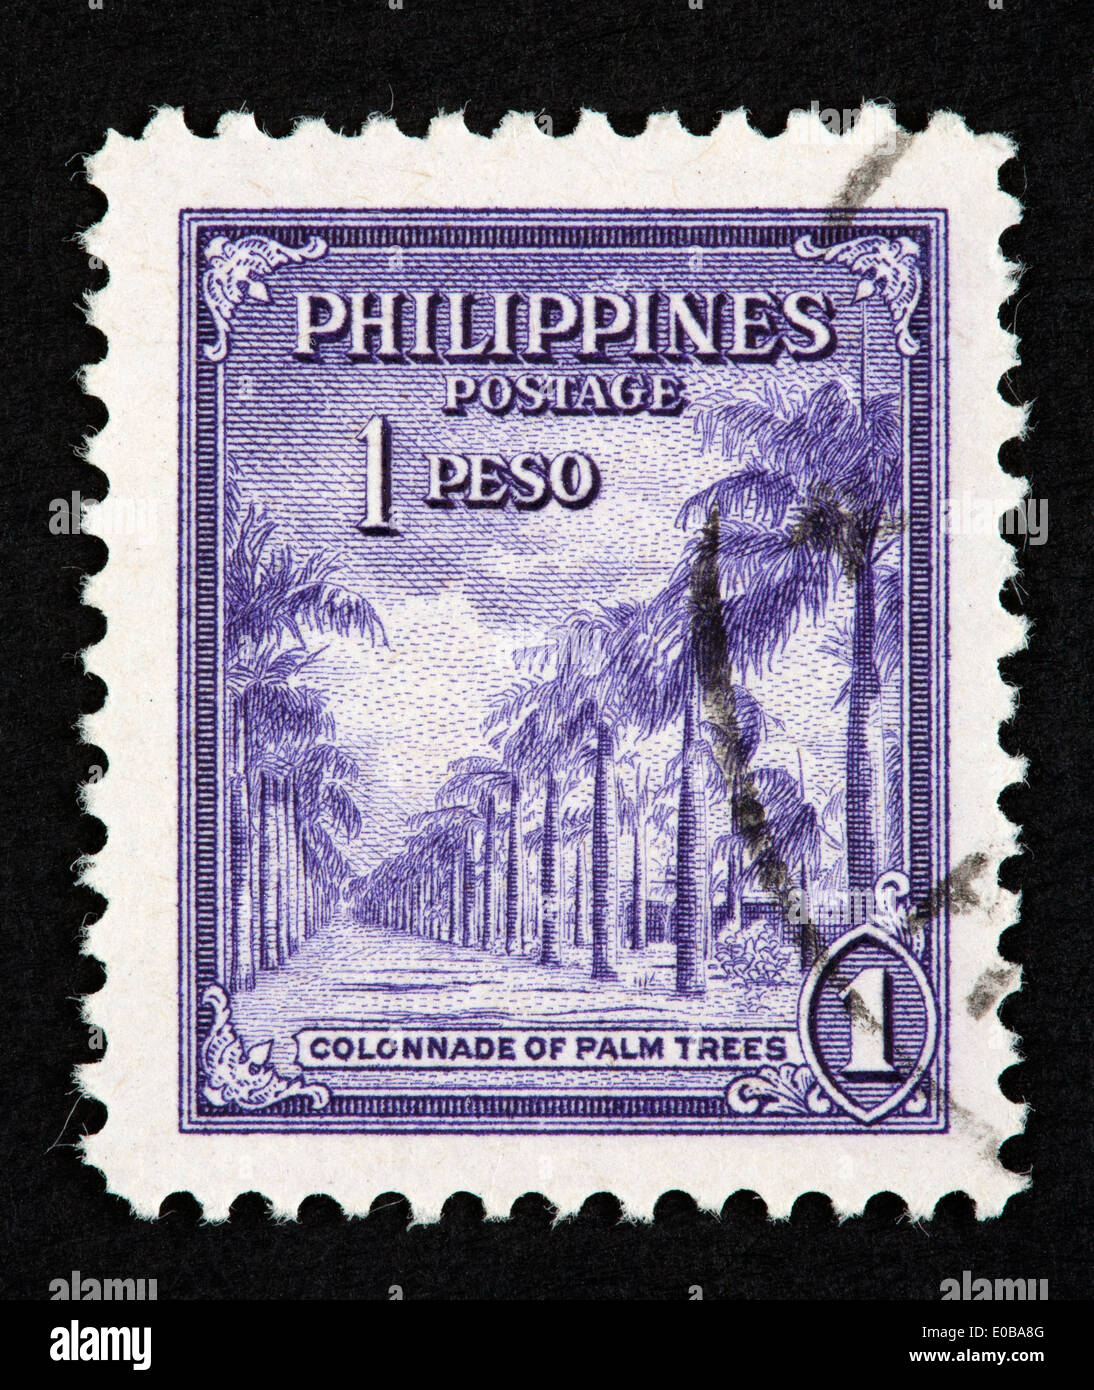 Timbre philippin Banque D'Images